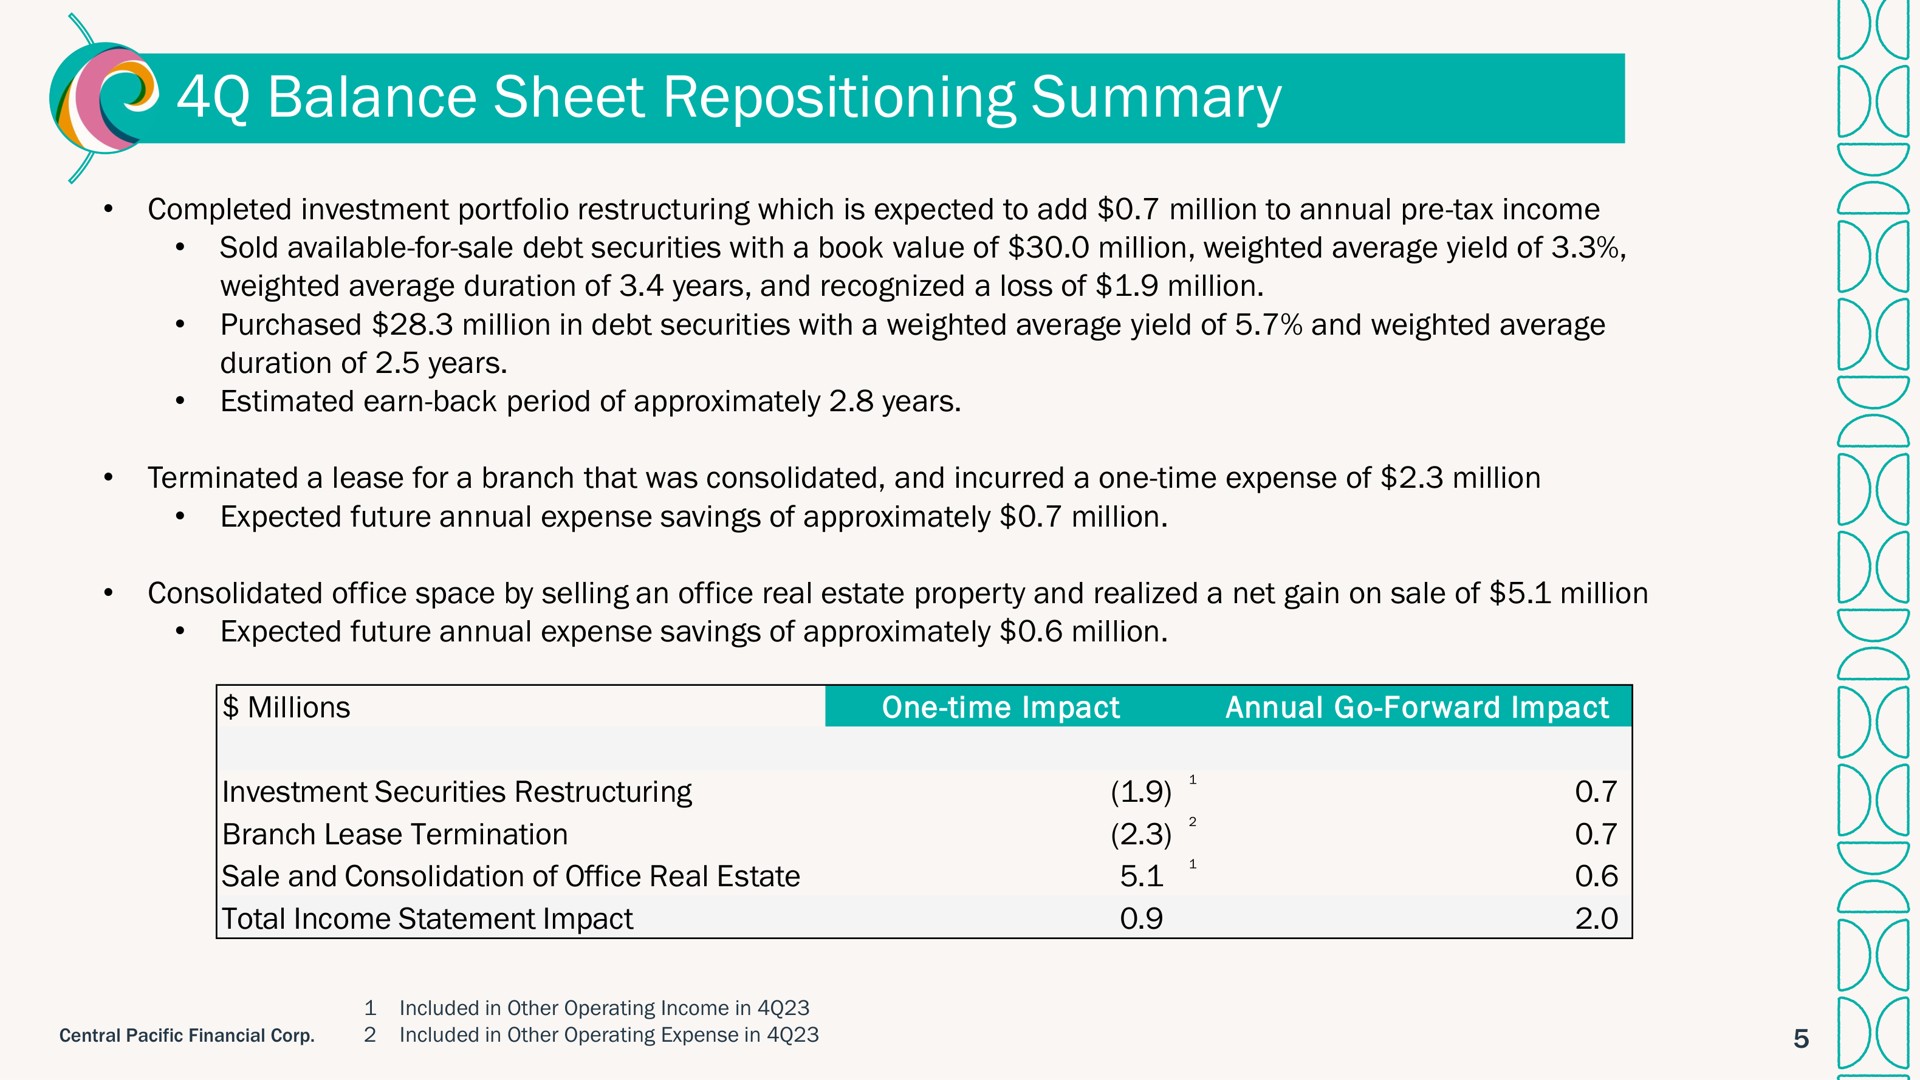 balance sheet repositioning summary | Central Pacific Financial